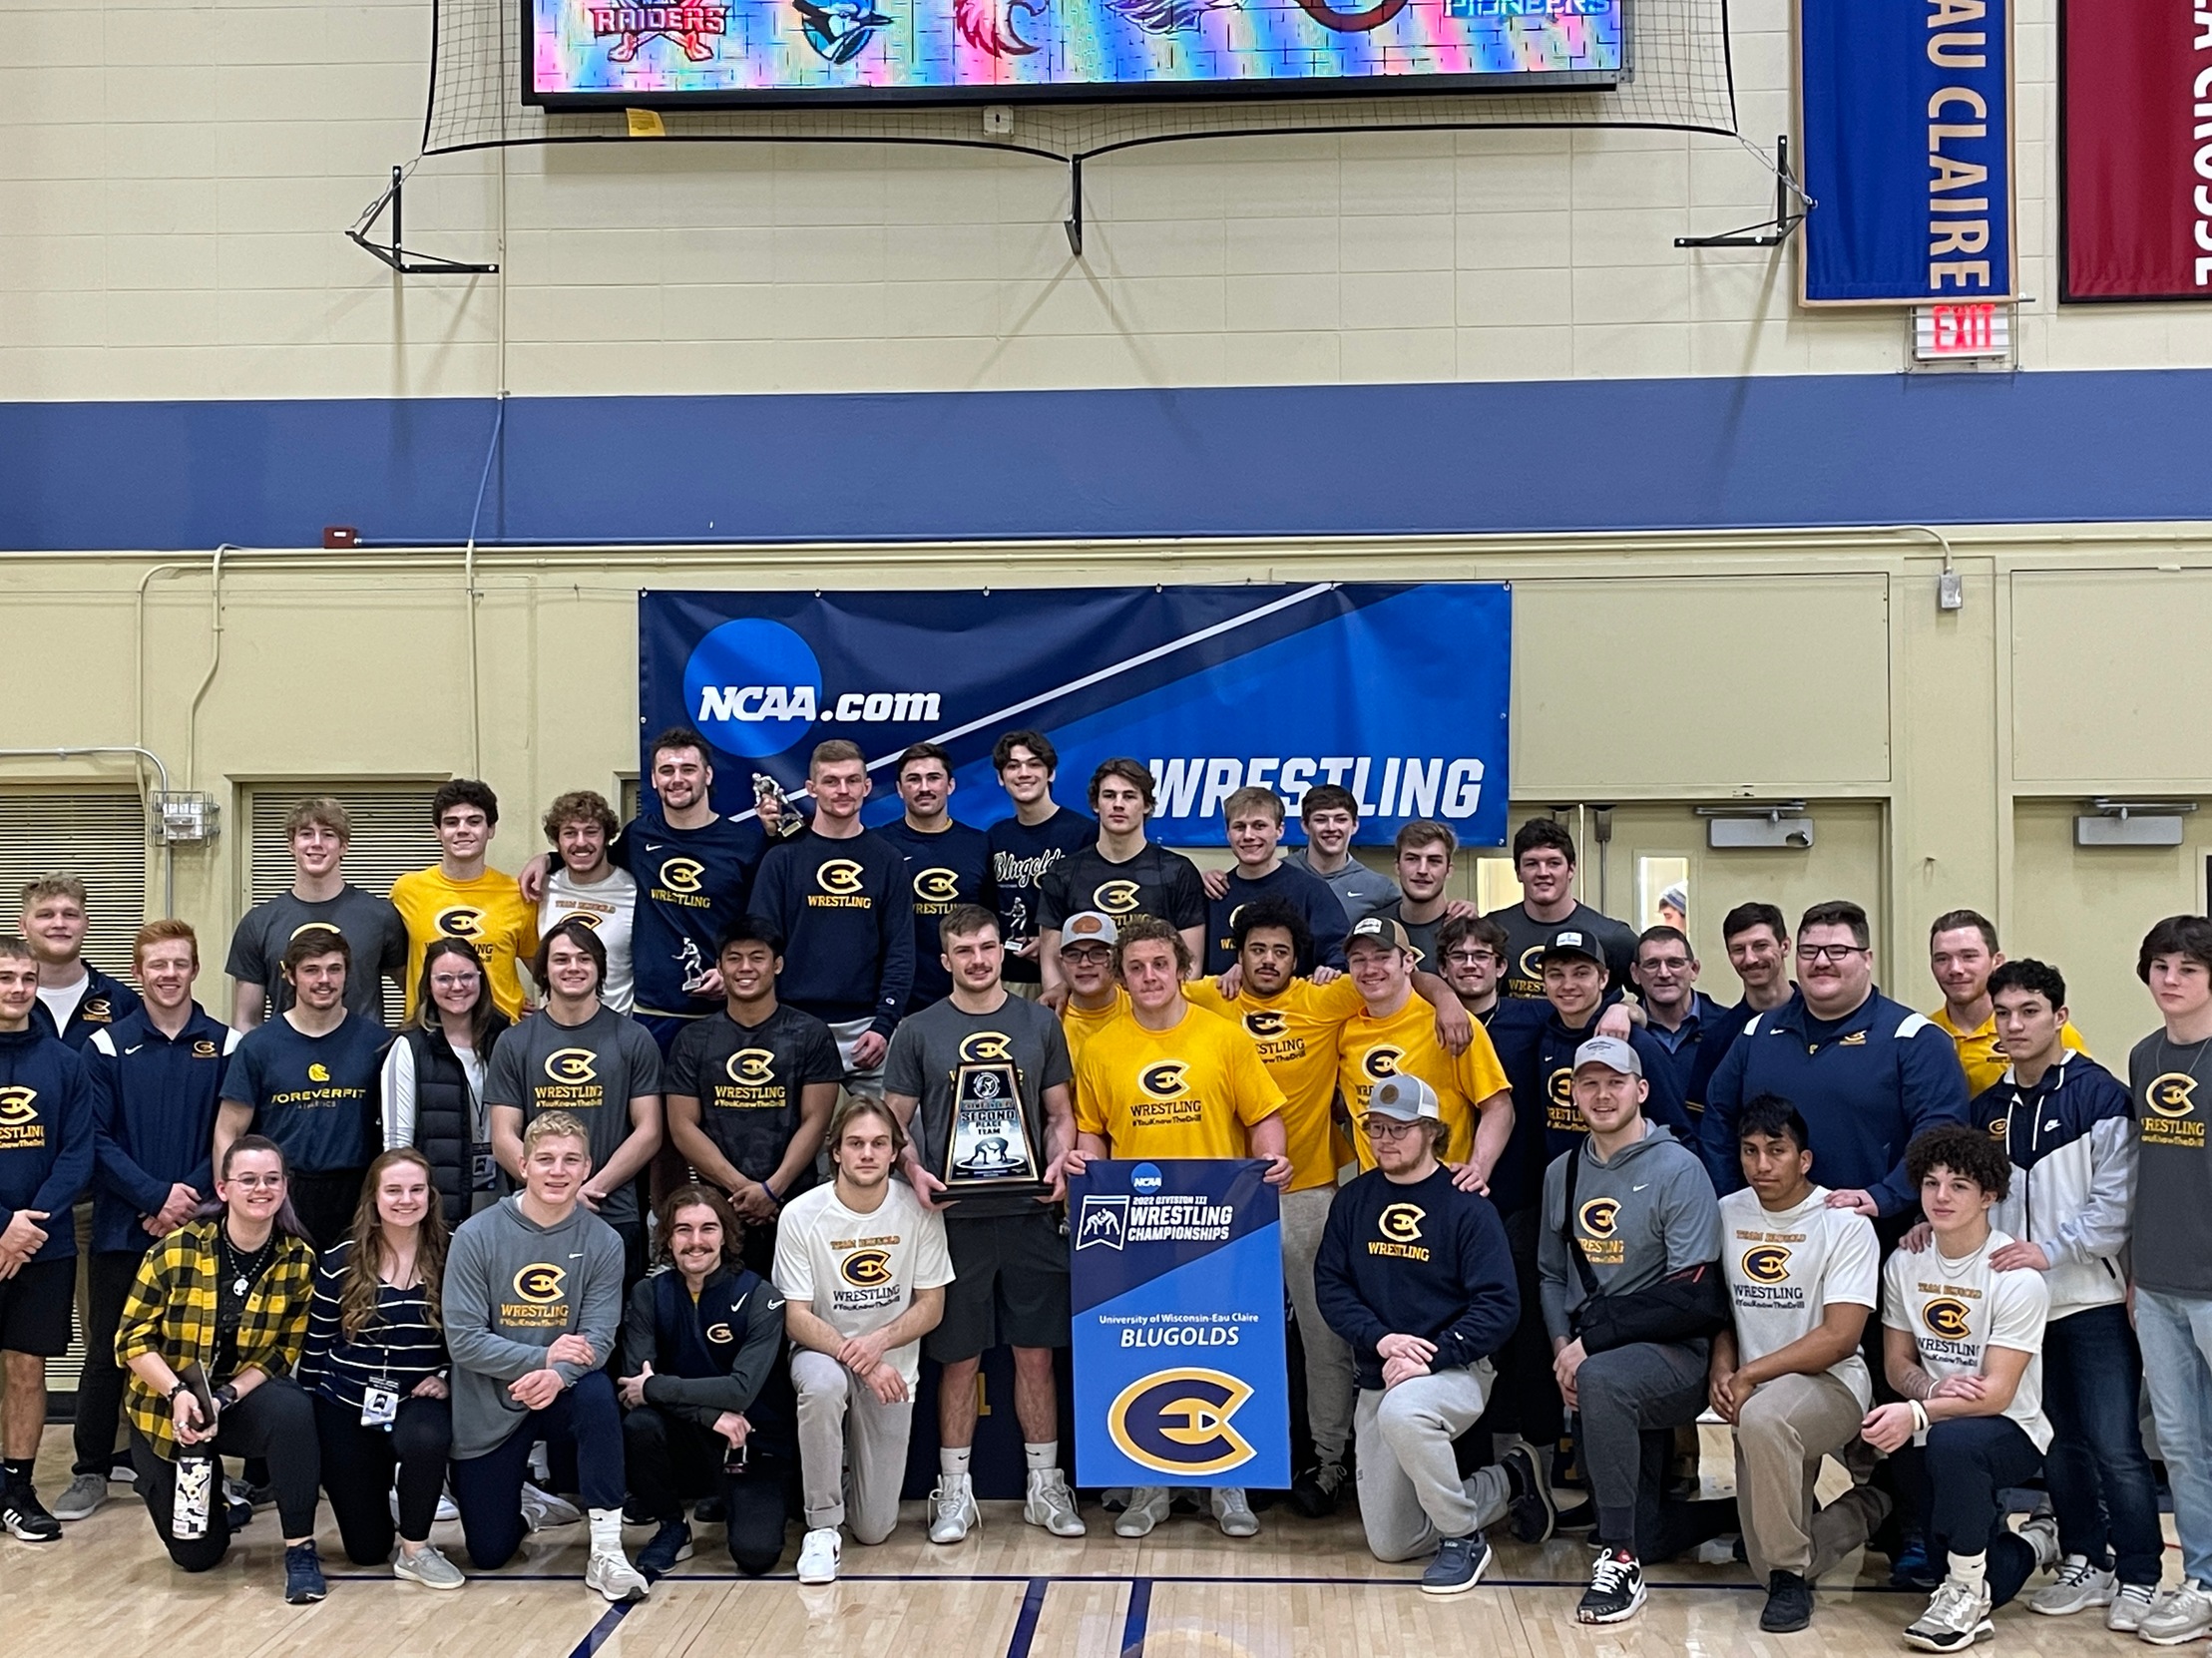 Blugolds Conclude Upper Midwest Regional in Historic Fashion